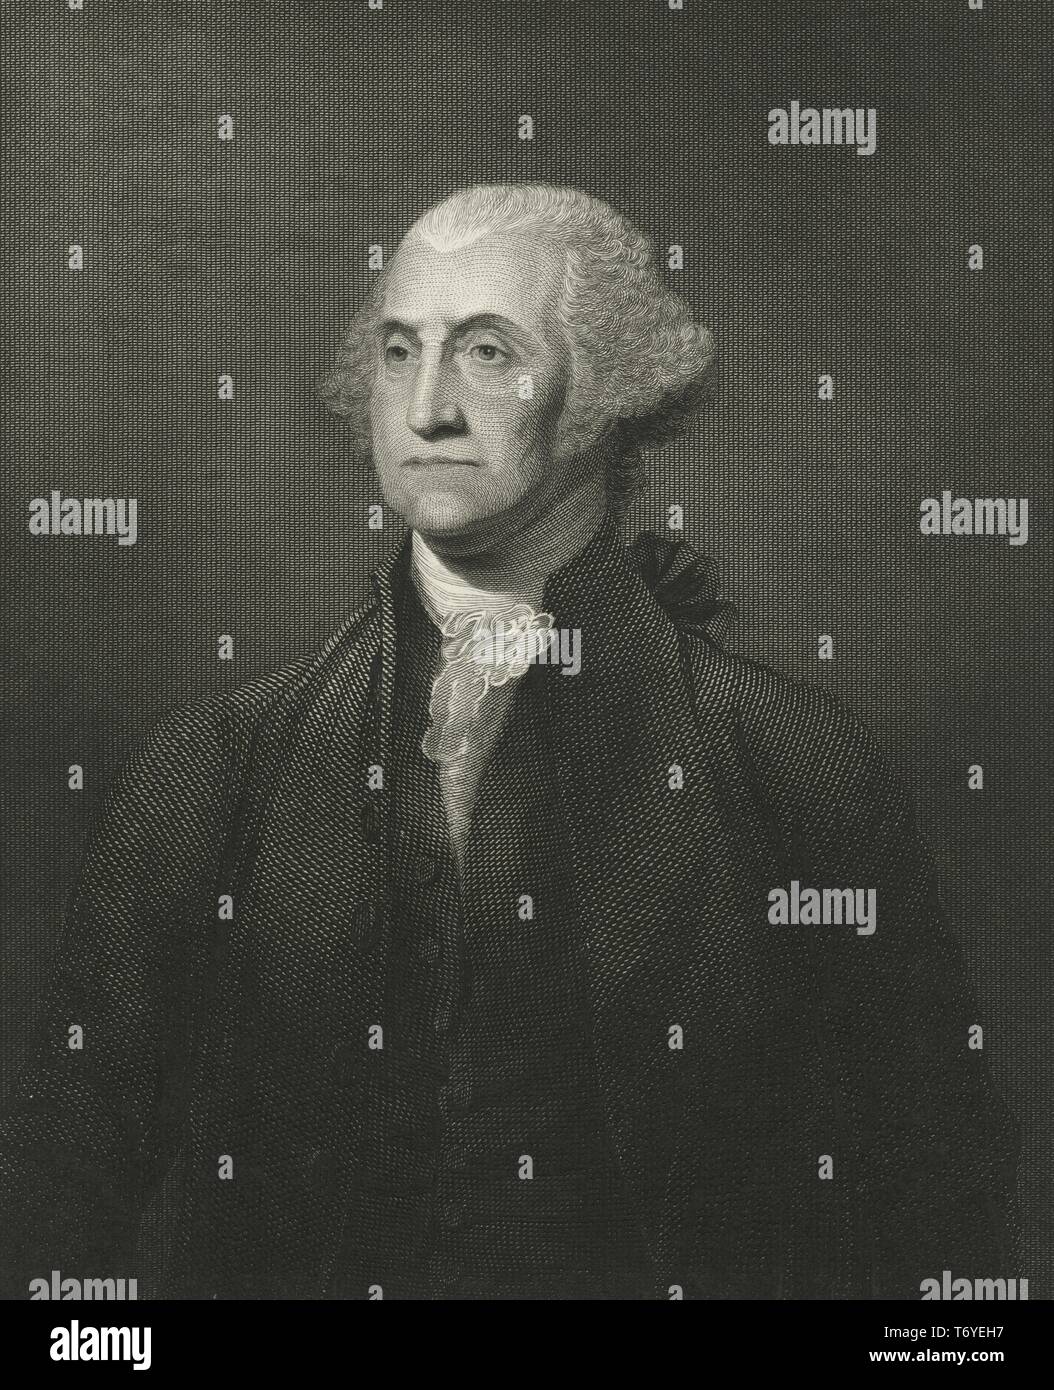 Engraved portrait of George Washington, a Founding Father and the first president of the United States of America, an American politician, general and statesman from Popes Creek, Colony of Virginia, British America, Washington, DC, 1831. From the New York Public Library. () Stock Photo